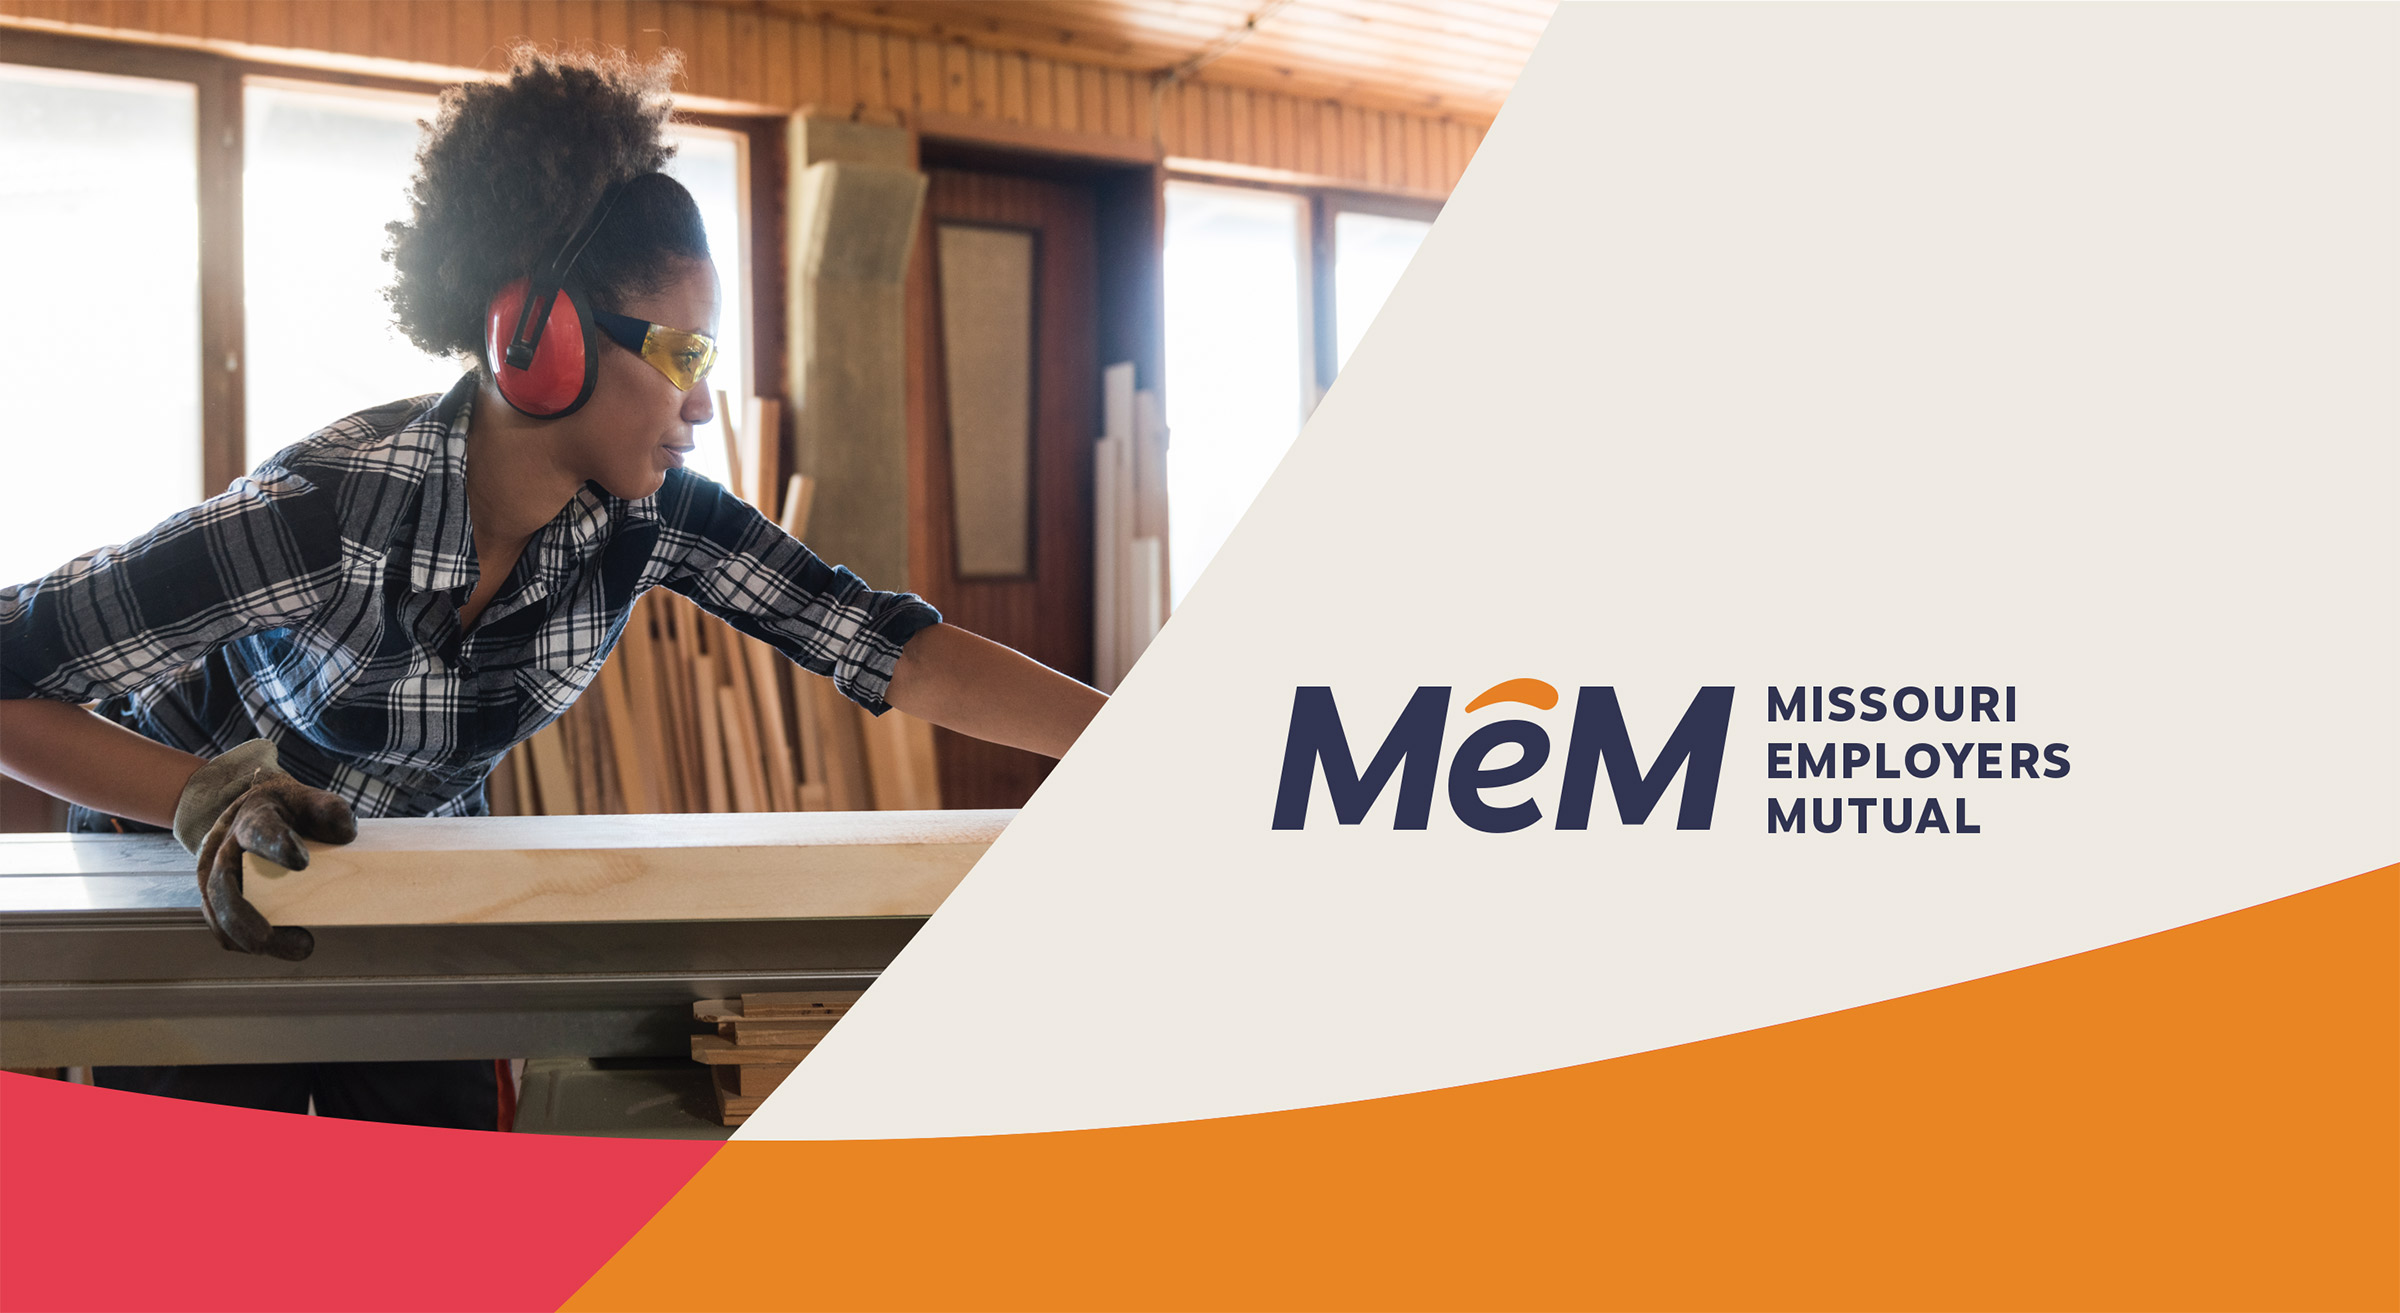 MeM - Insurance branding logo and photo of woman with band saw